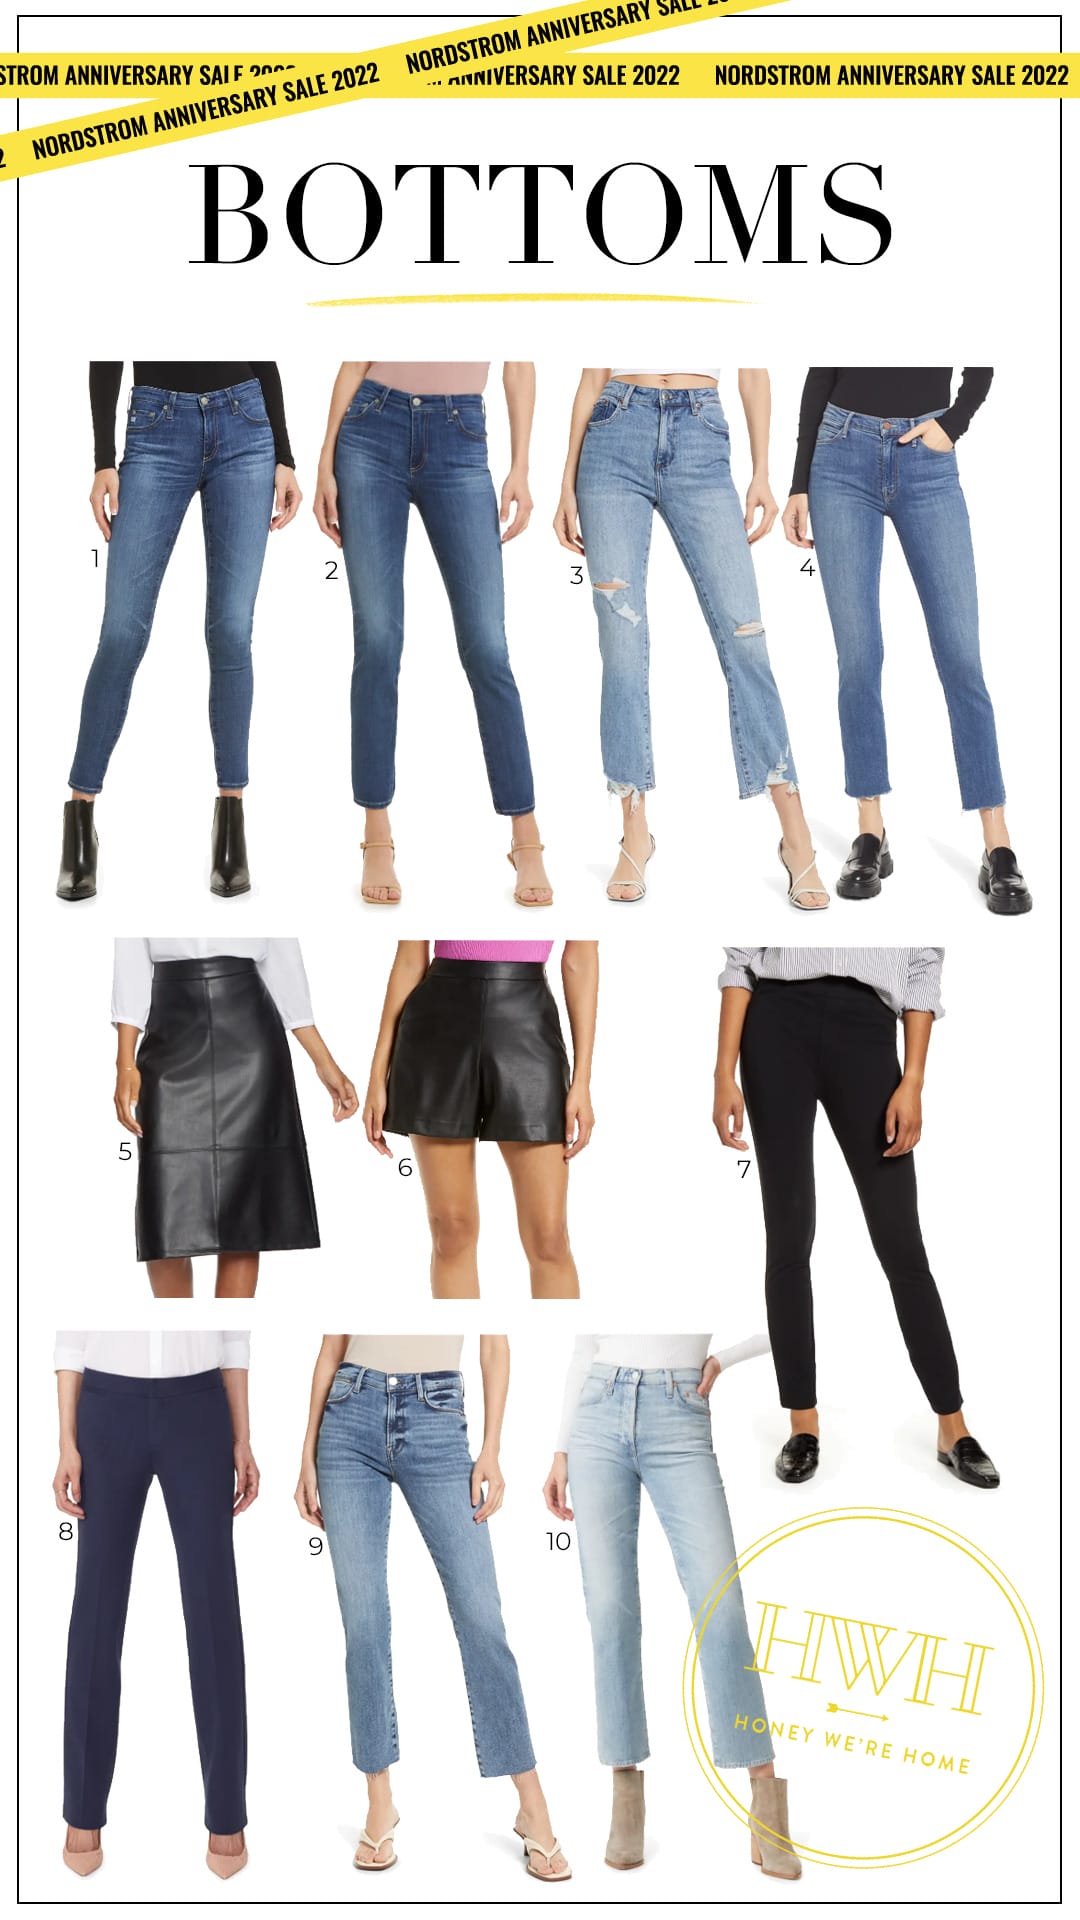 Nordstrom Anniversary Sale Jeans 